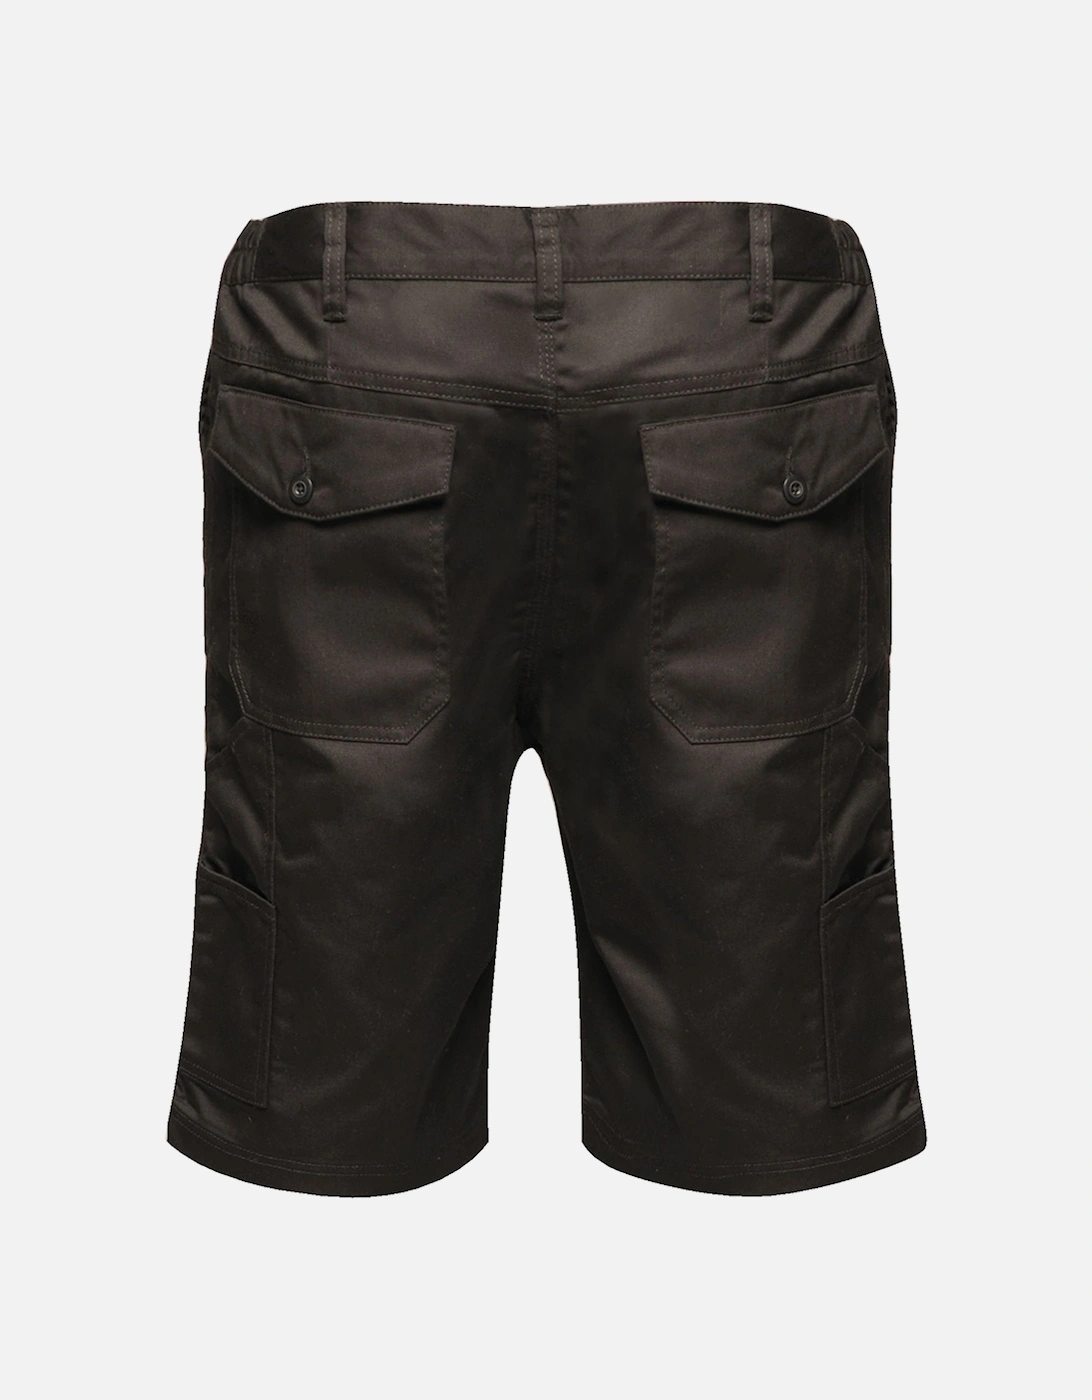 Mens Pro Water Repellent Workwear Cargo Shorts